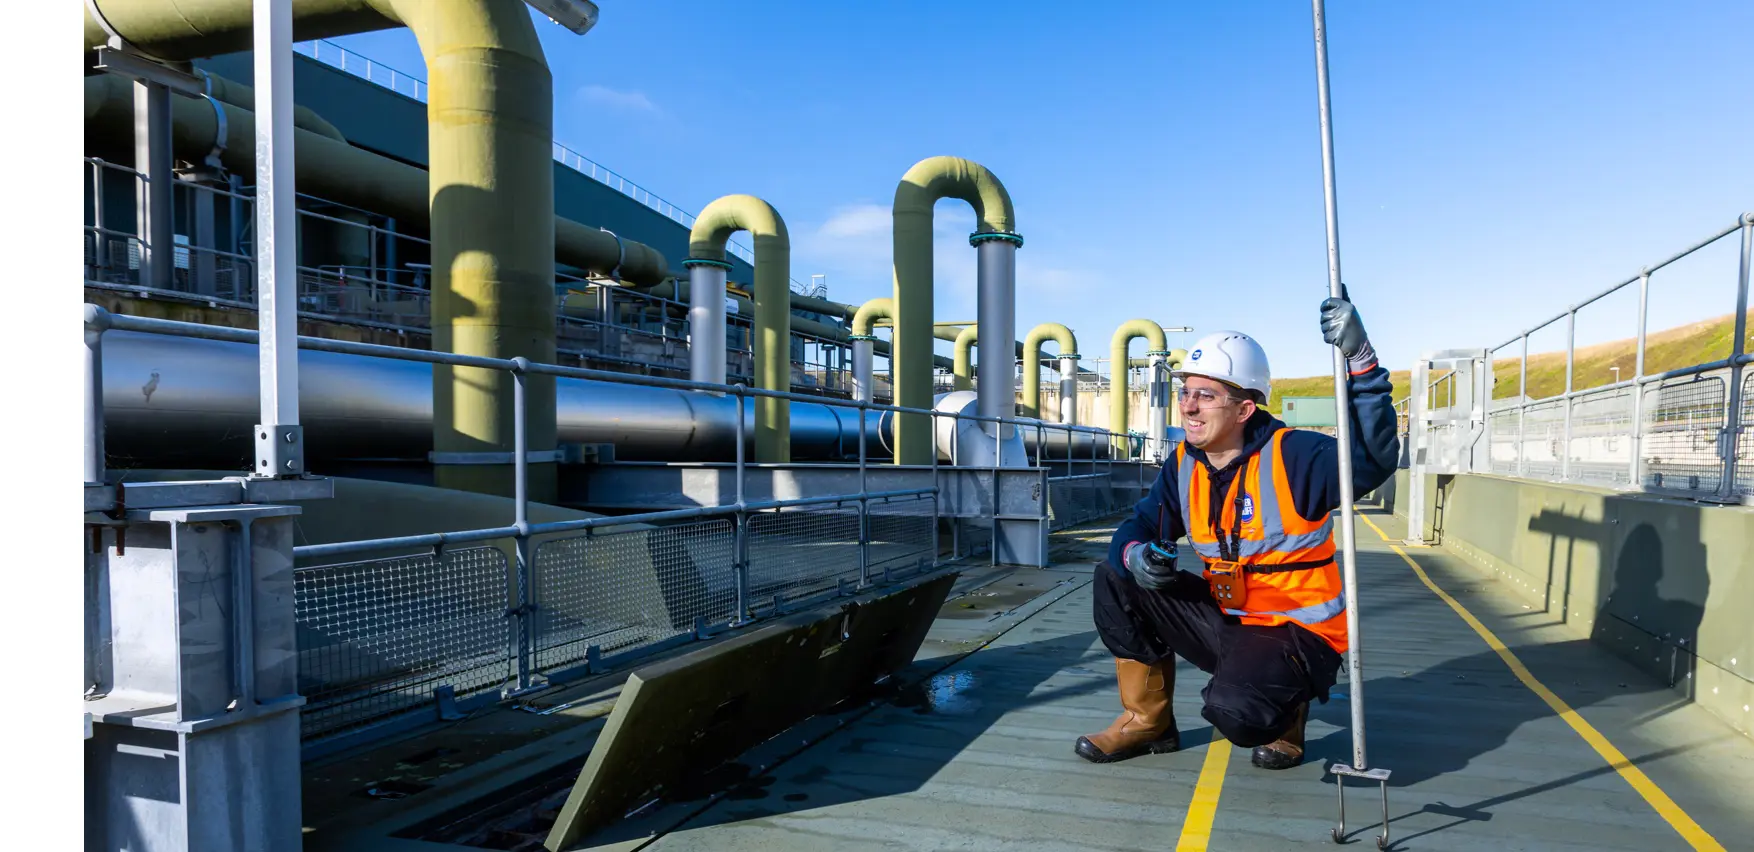 A Southern Water engineer smiles and crouches next to pipes at a water treatment works